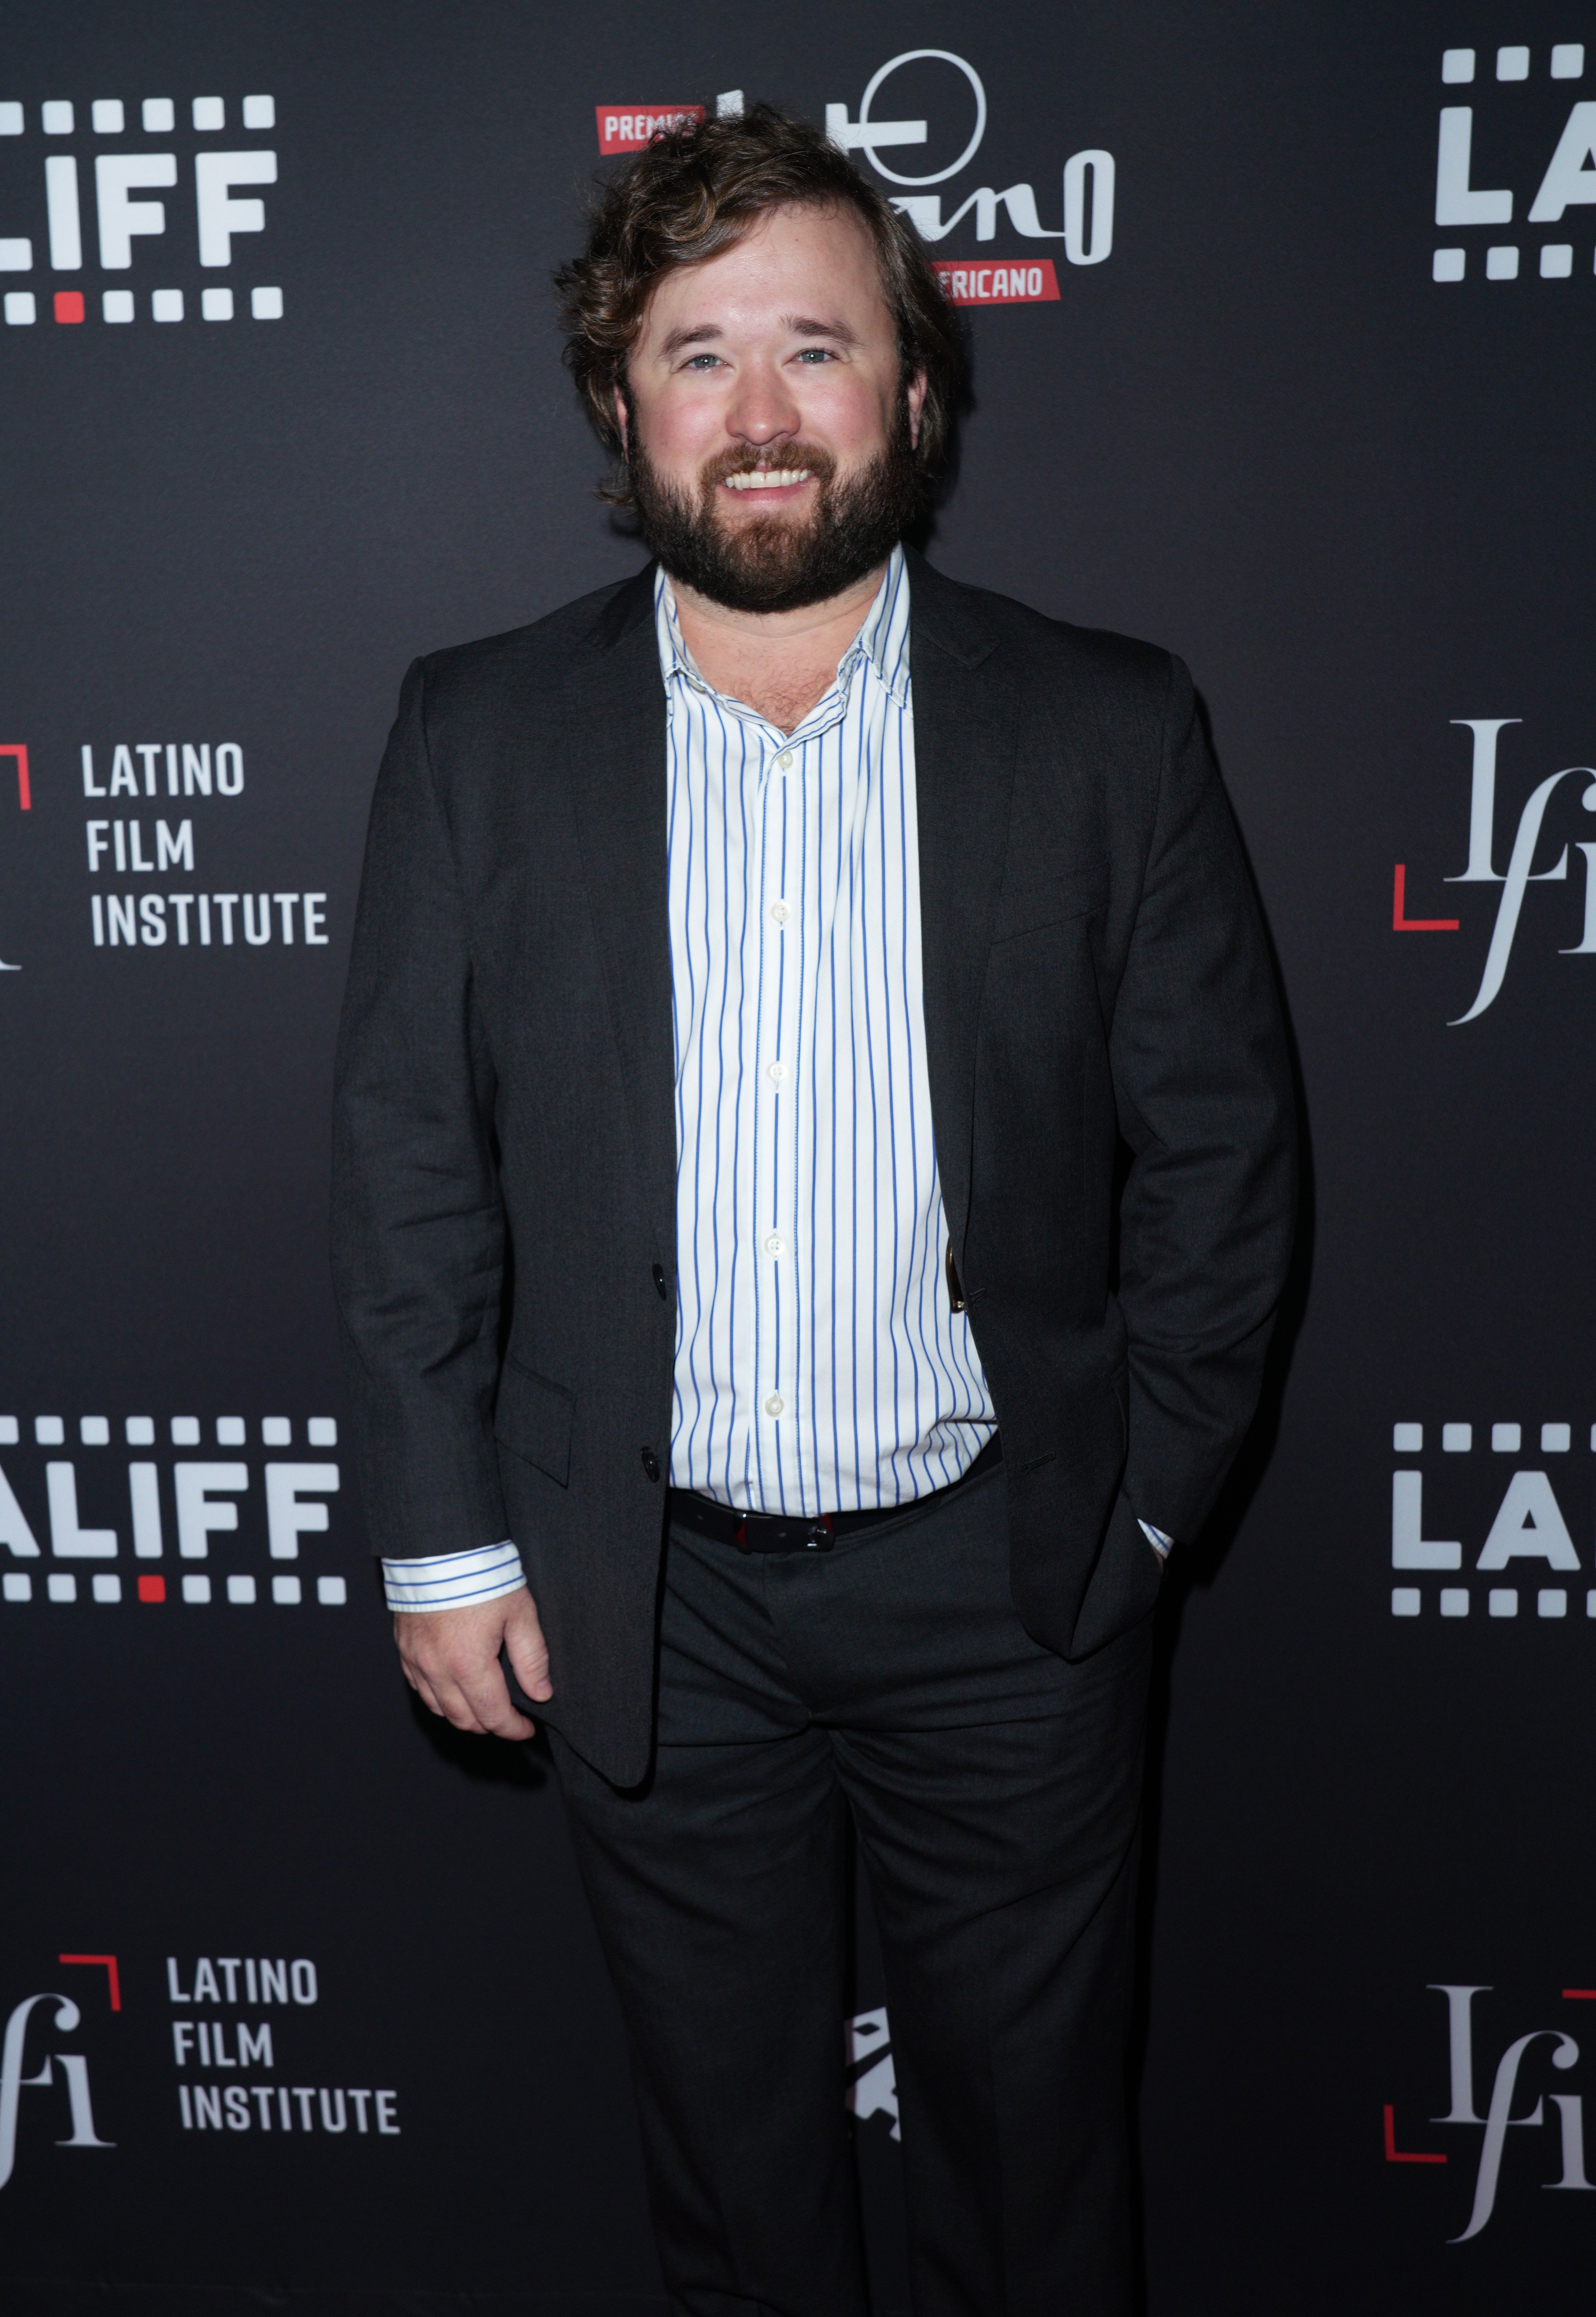 Haley Joel Osment besucht das 2019 Los Angeles Latino International Film Festival - Closing Night Premiere von "The Devil Has A Name" im TCL Chinese Theatre am 04. August 2019 in Hollywood, Kalifornien. | Quelle: Getty Images